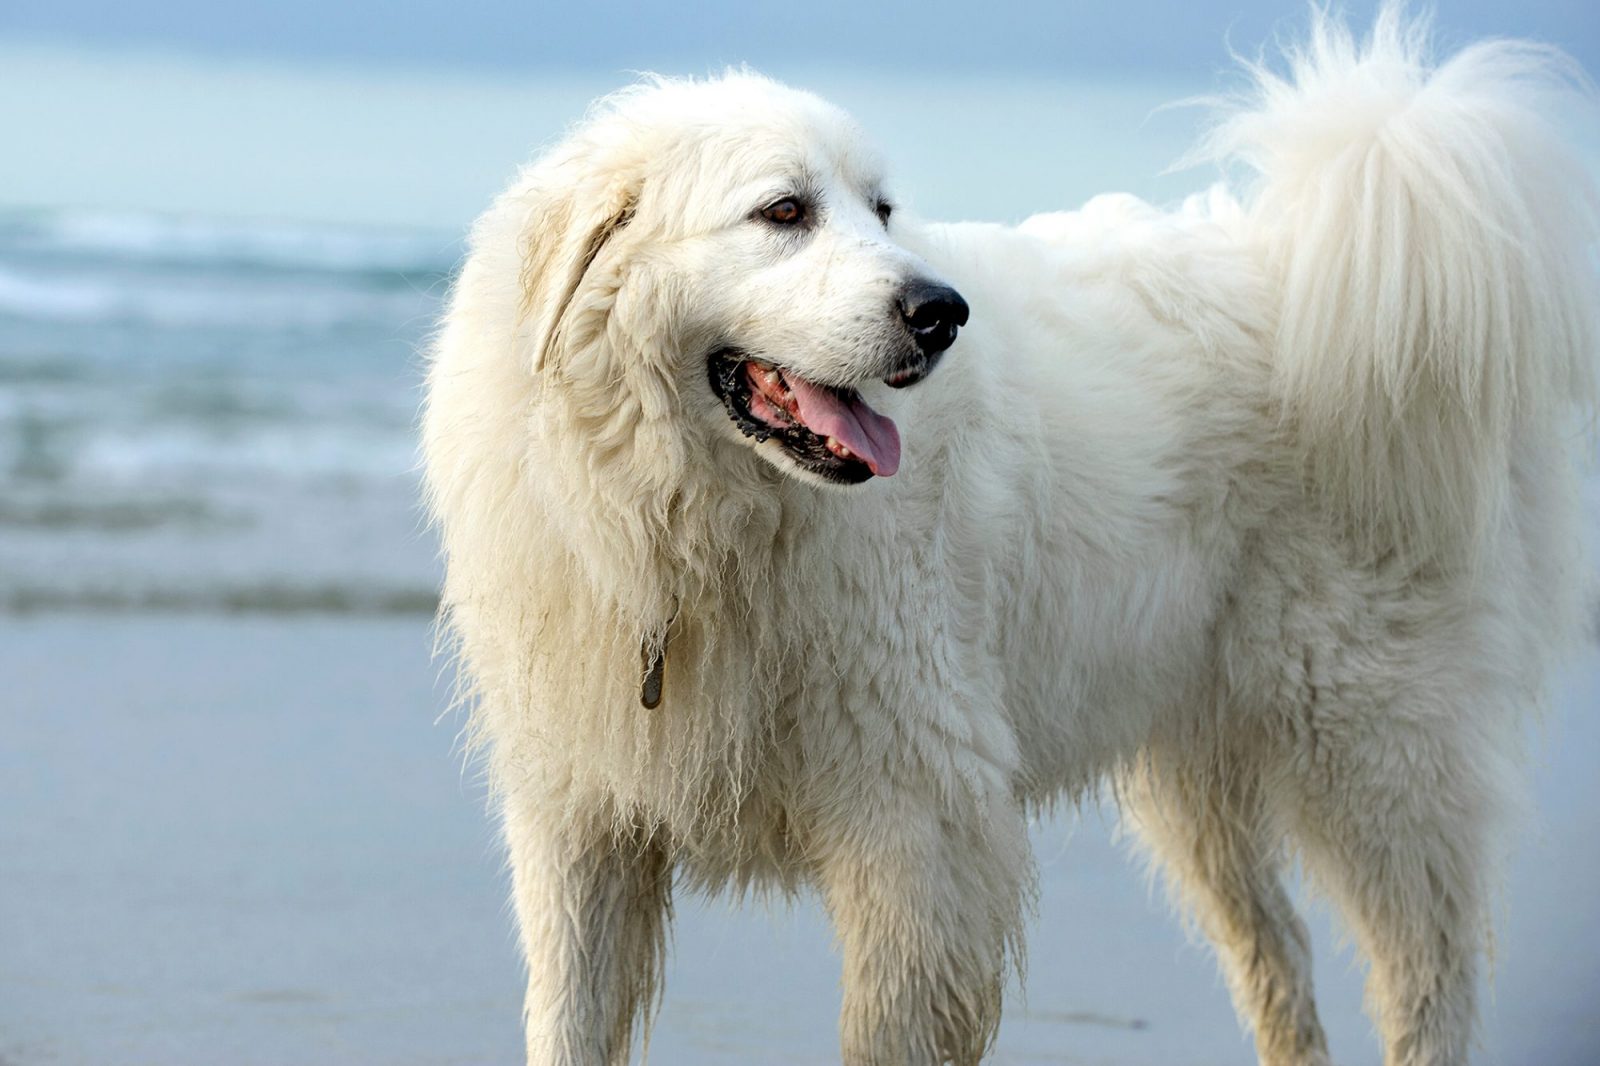 This 🐕 Dog Breeds Quiz May Be a Liiiittle Challenging, But Let’s See If You Can Score 15/20 Pyrenean Mountain Dog